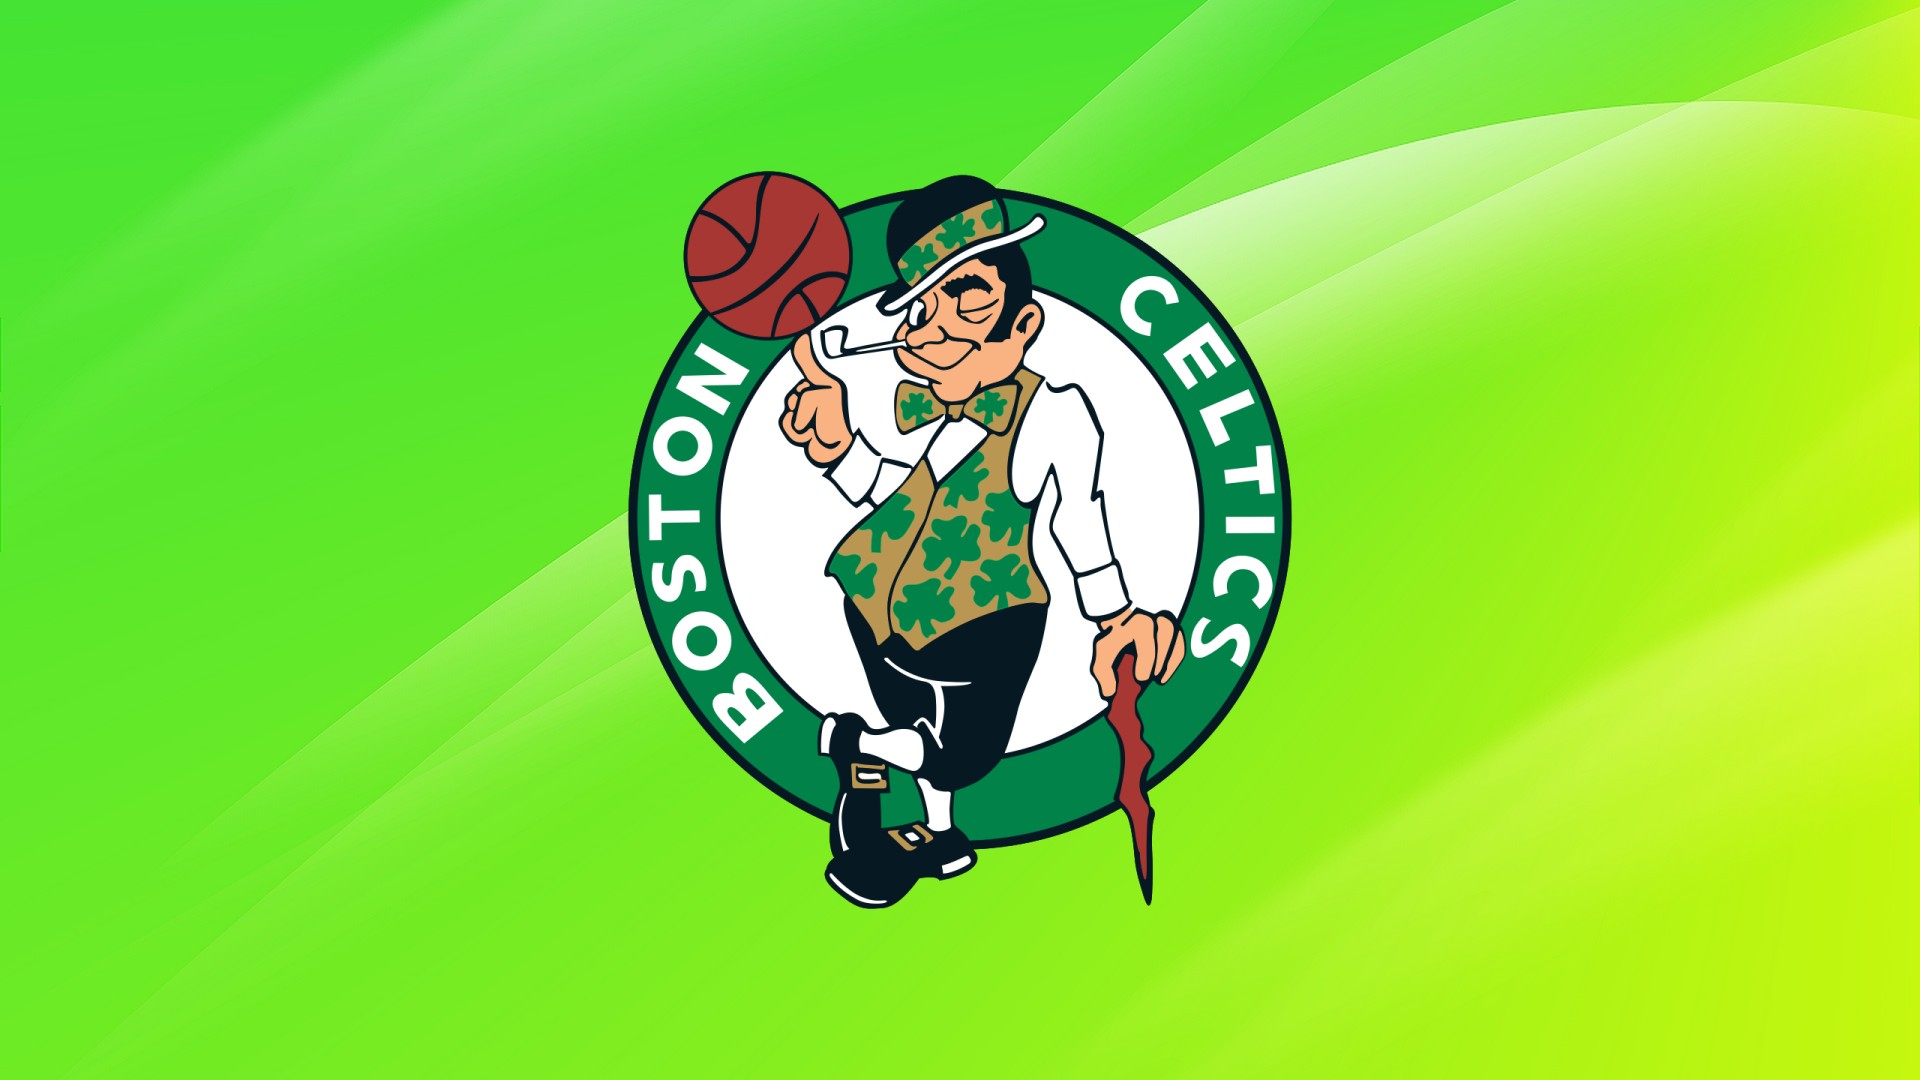 Wallpapers Boston Celtics Logo with image dimensions 1920x1080 pixel. You can make this wallpaper for your Desktop Computer Backgrounds, Windows or Mac Screensavers, iPhone Lock screen, Tablet or Android and another Mobile Phone device